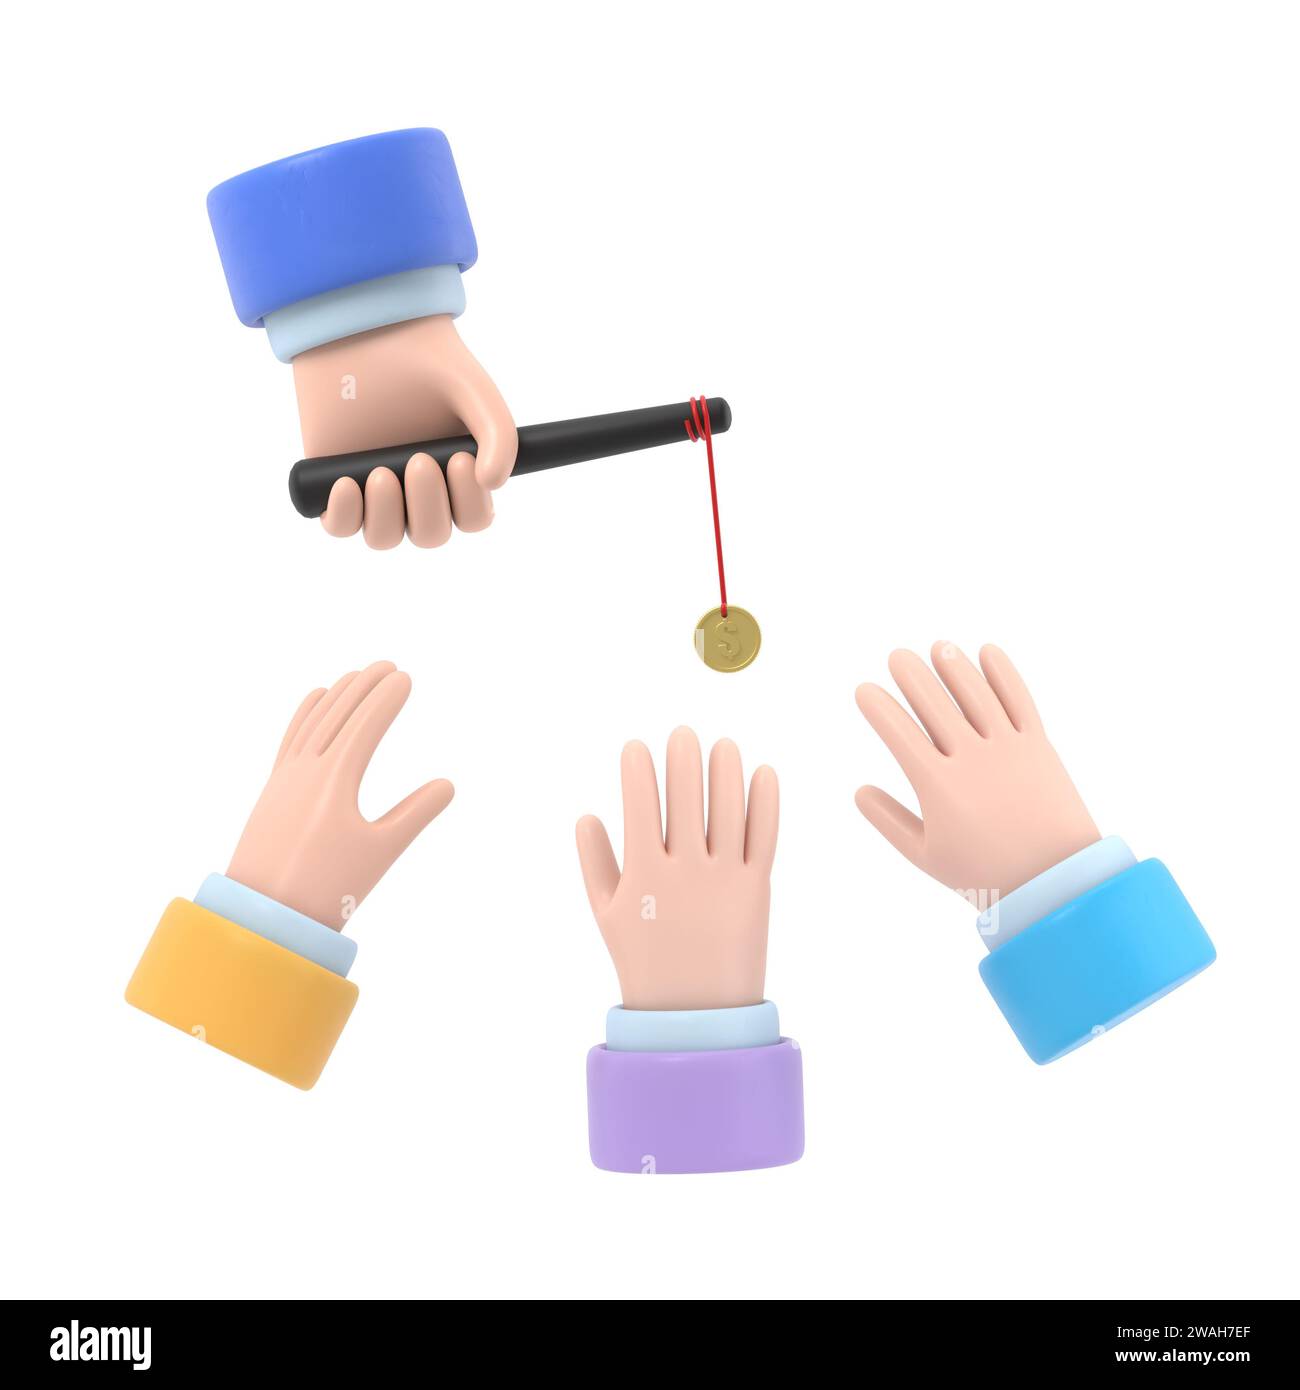 Incentive concept. Business metaphor. Personnel management leadership. Motivate people. Big hand holds gold coin on stick,businessman running for bait Stock Photo